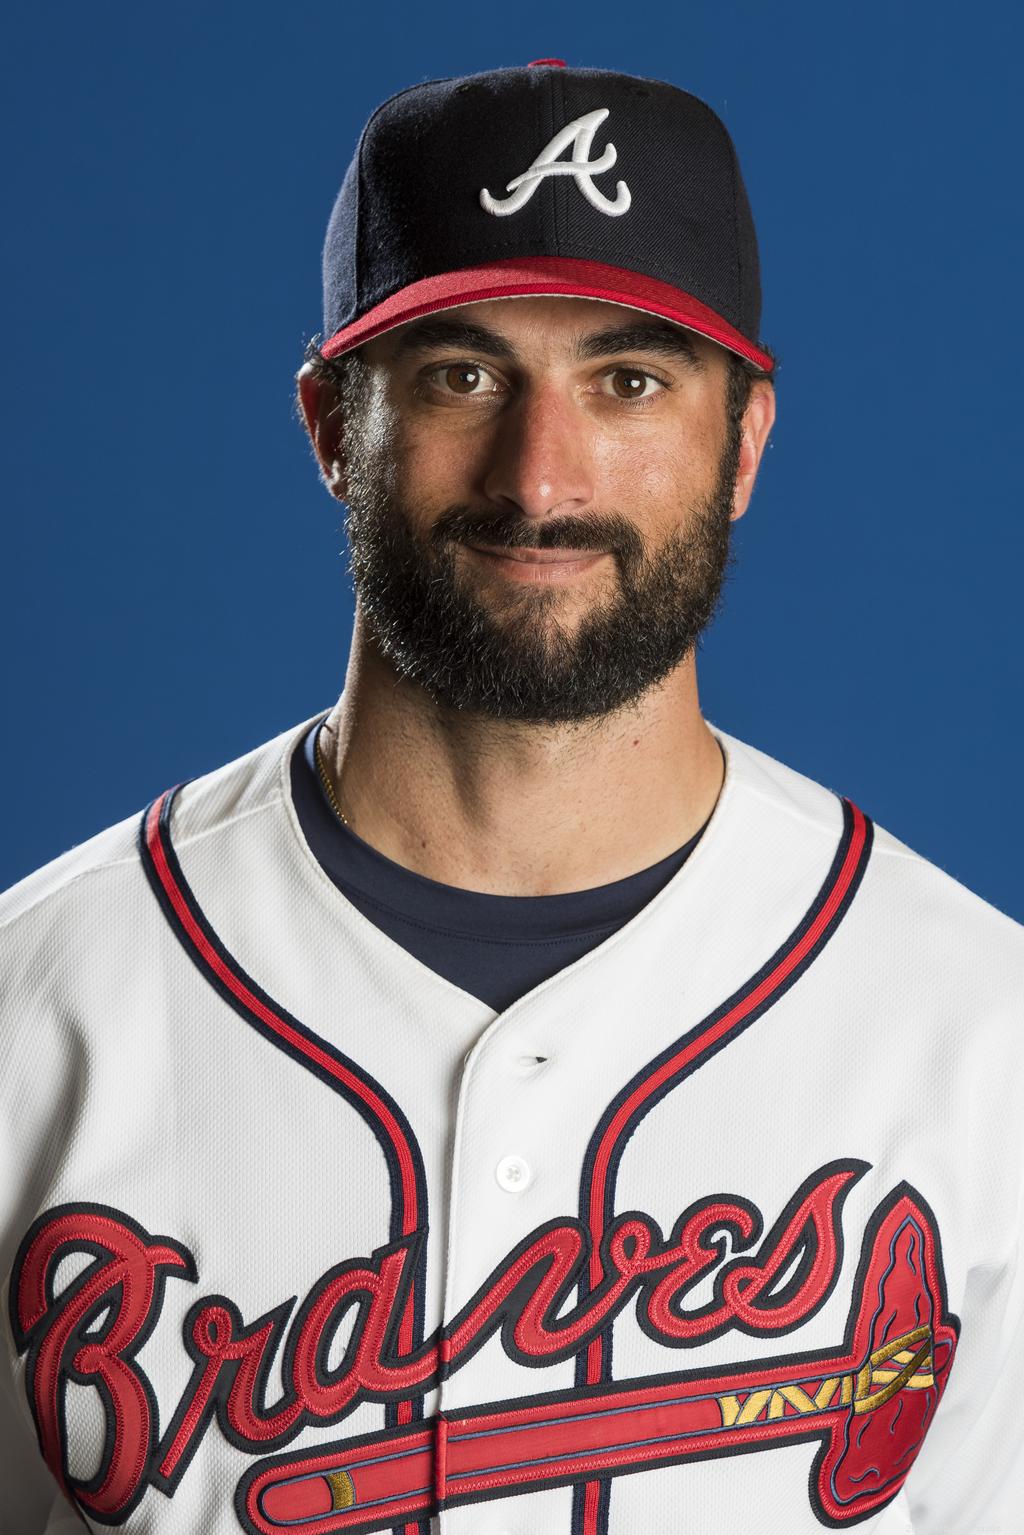 Nick Markakis of the Atlanta Braves works out before a game